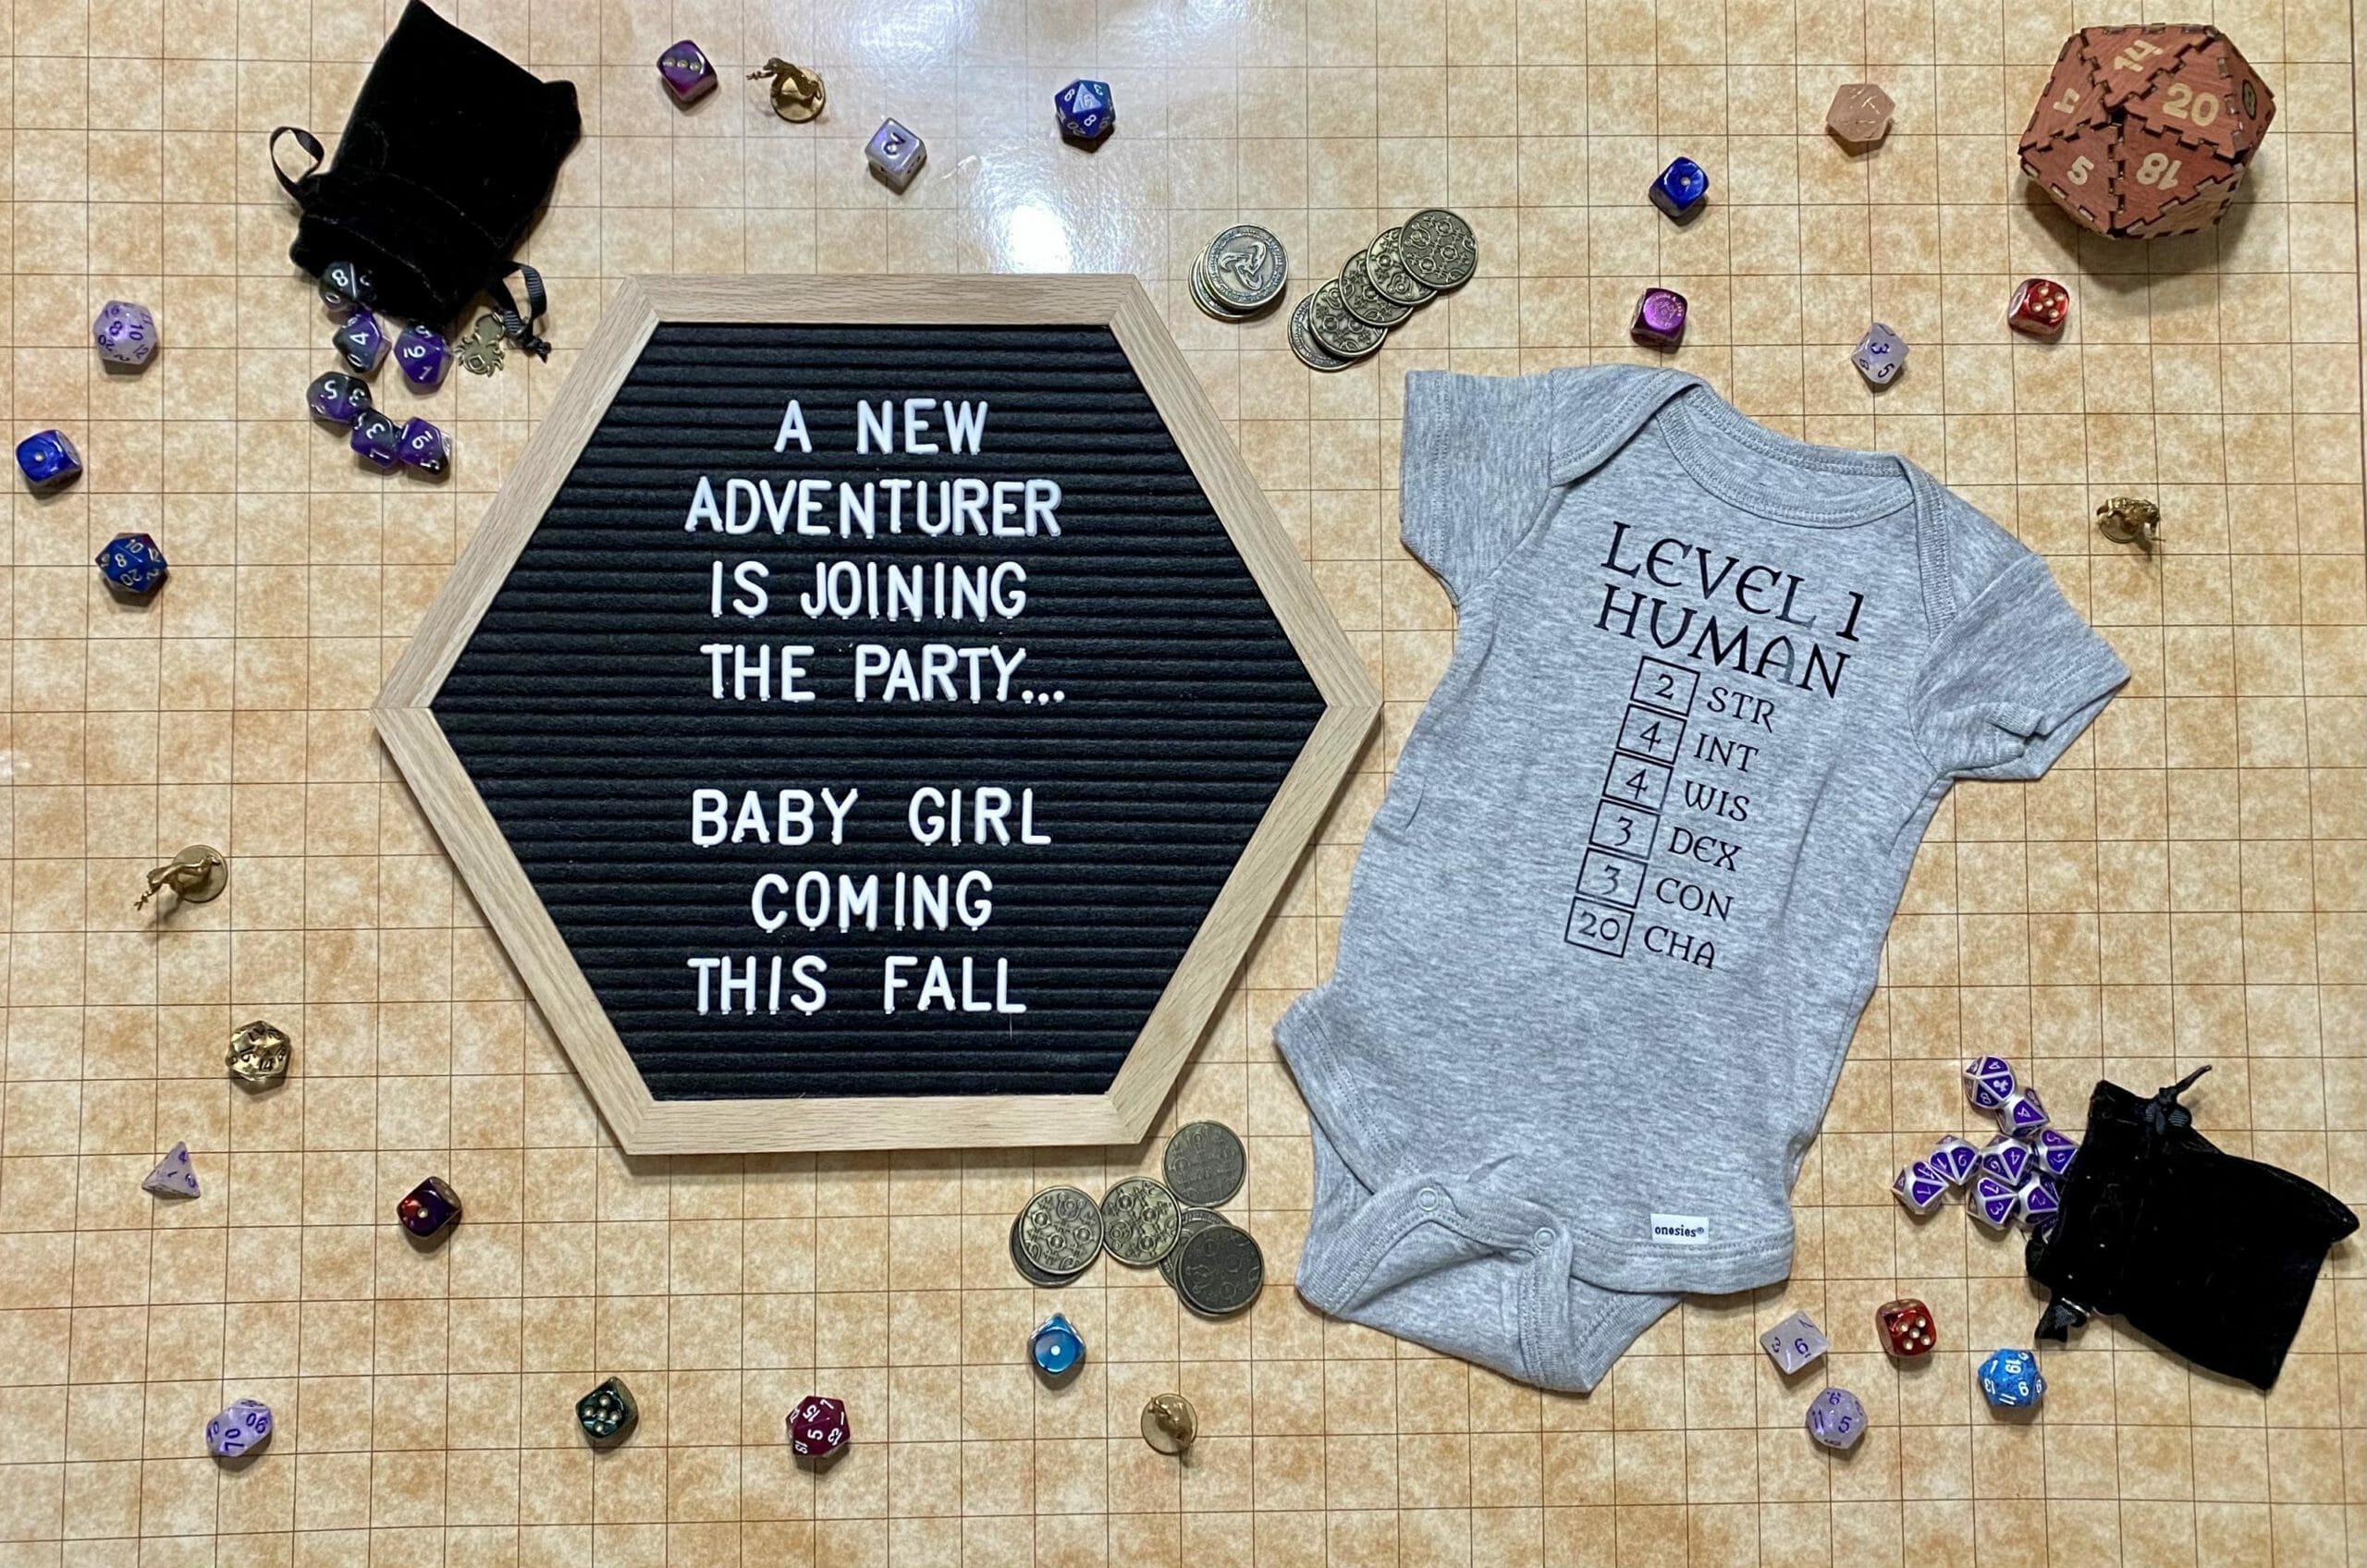 A new adventurer is joining the party... baby girl coming this fall